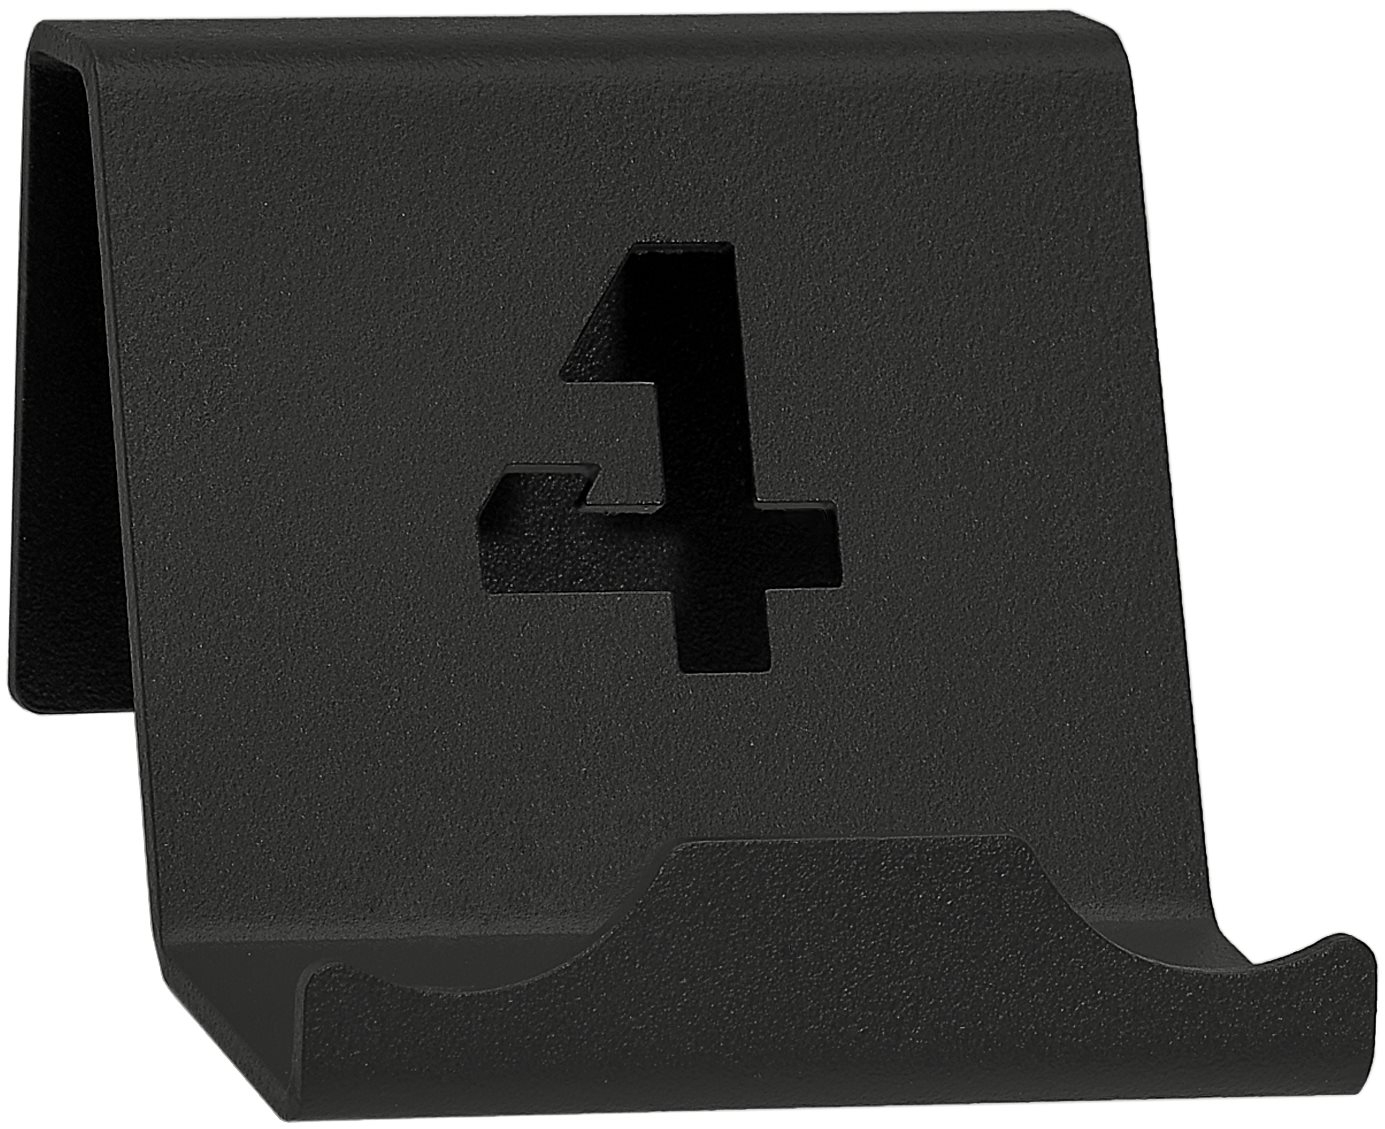 4mount - Wall Mount for Controller Black